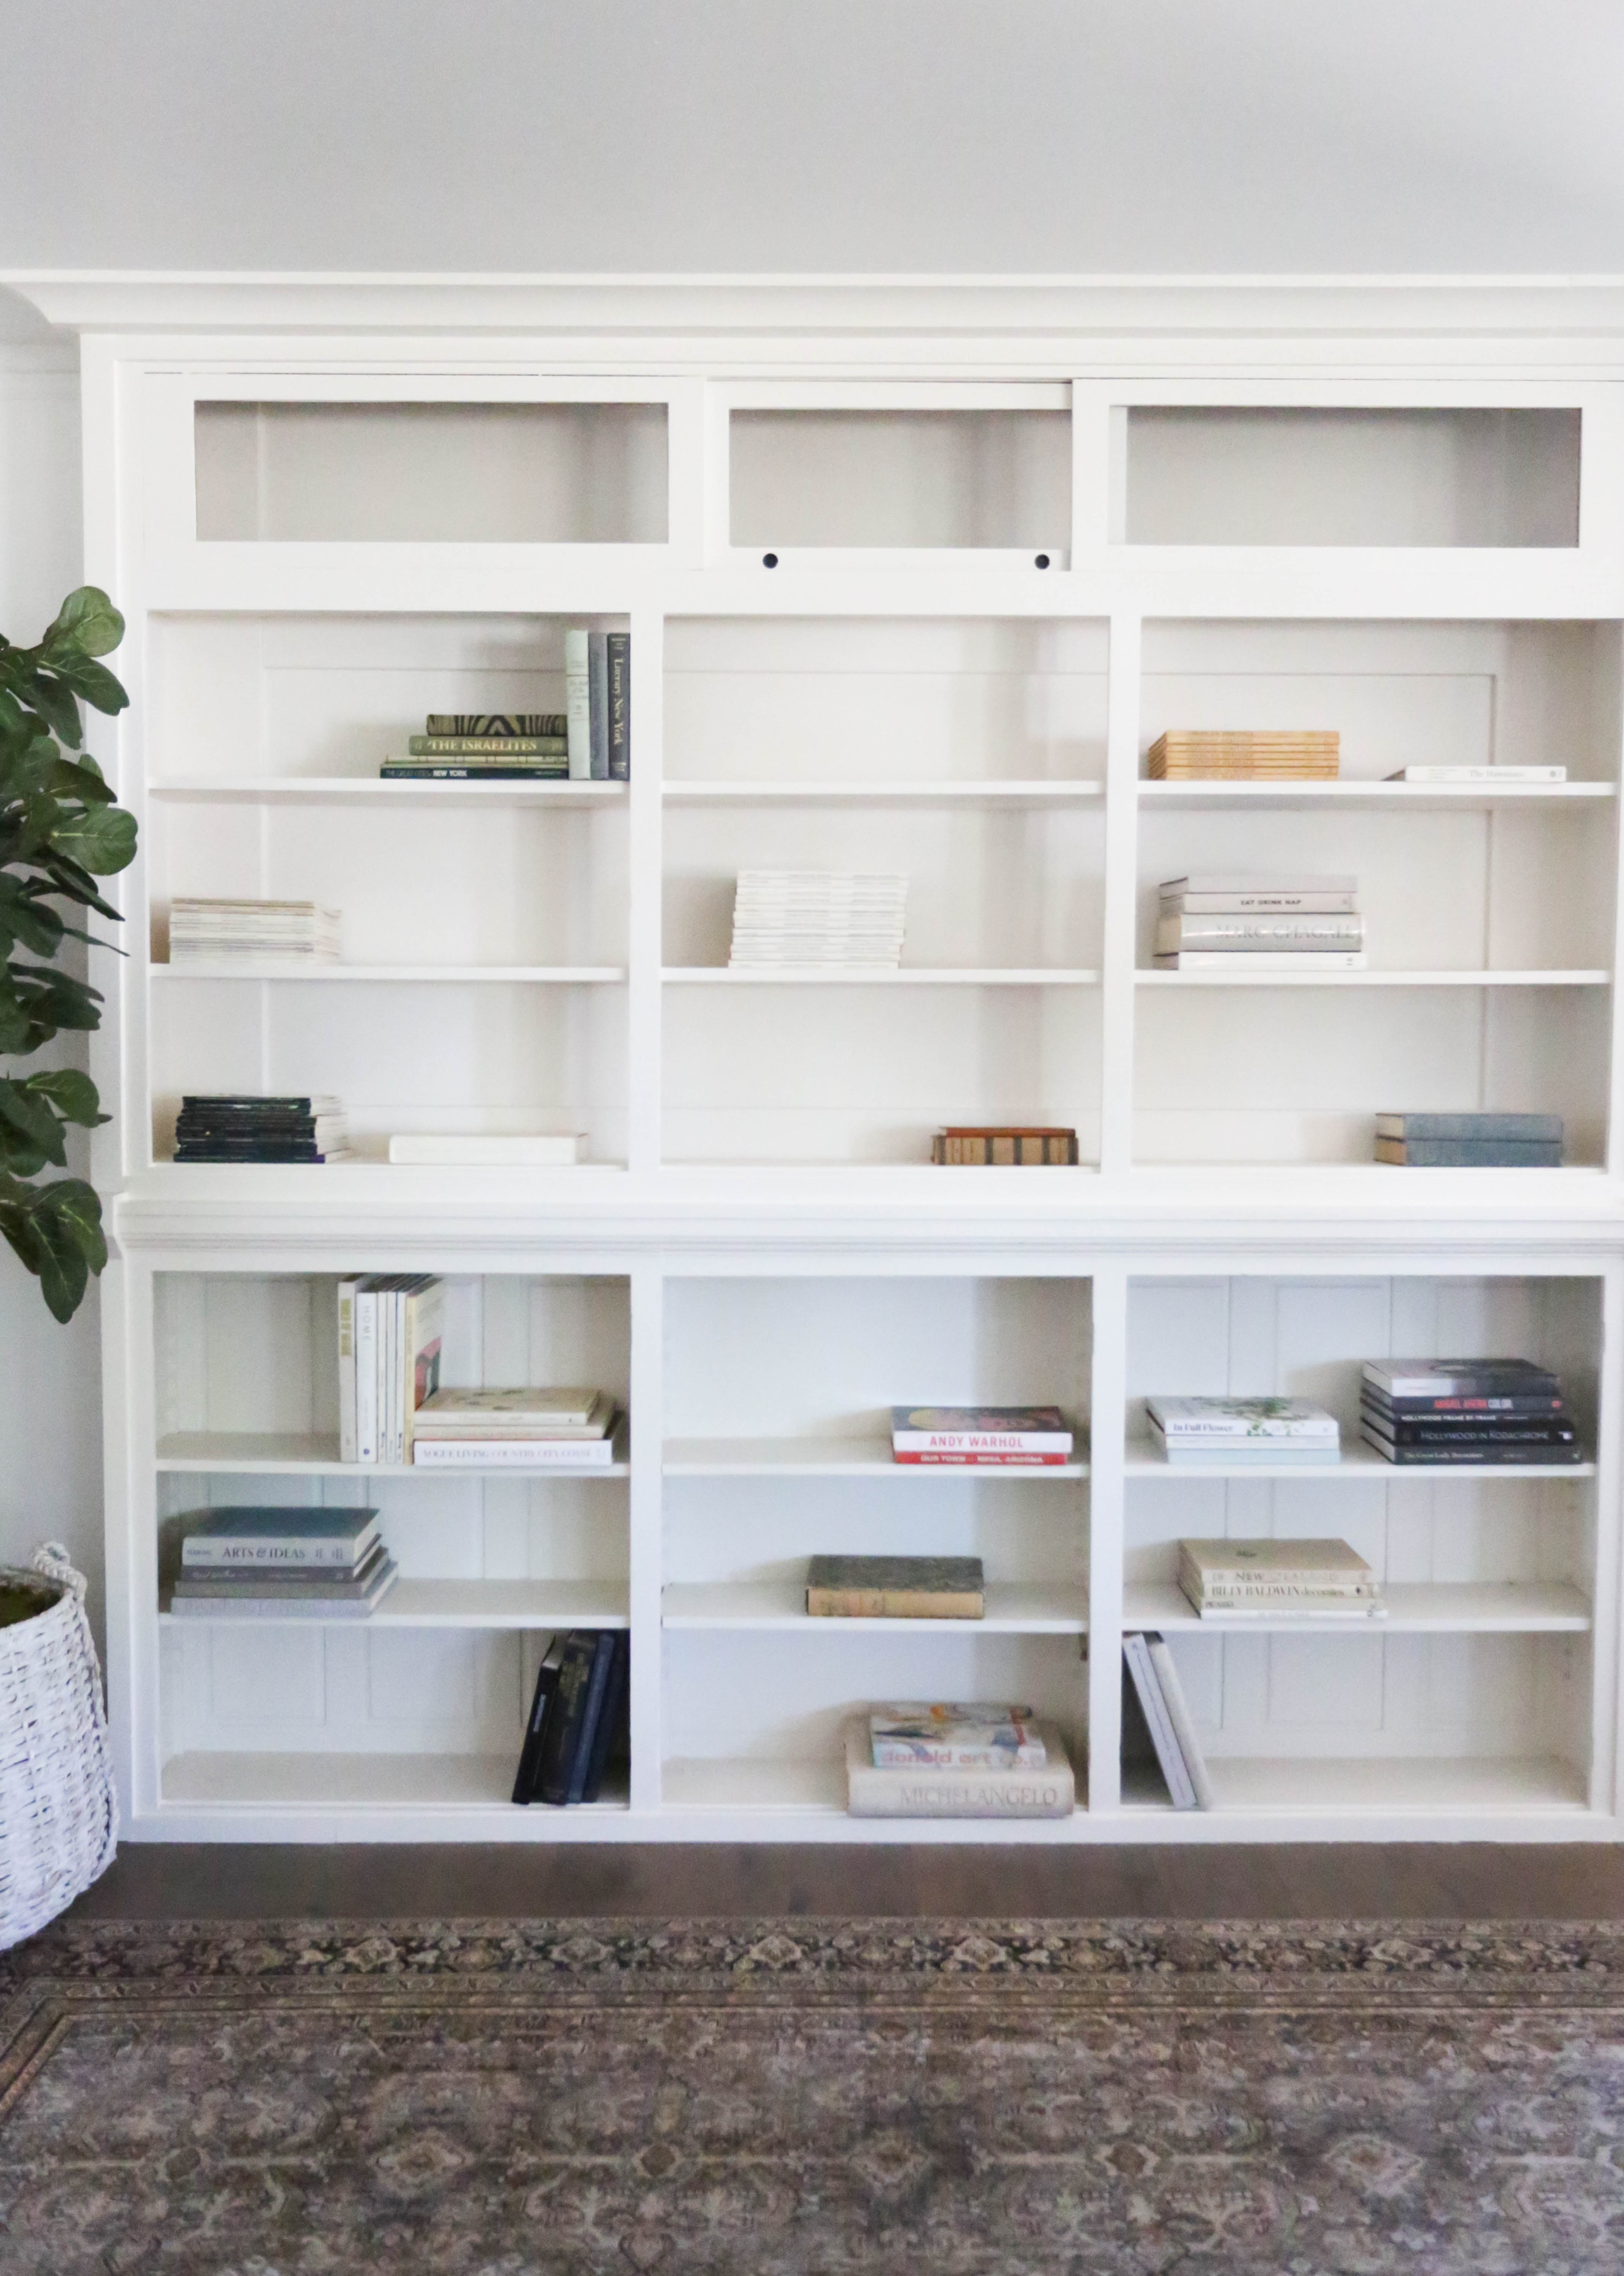 Why Styling Your Bookshelves Is So Personal